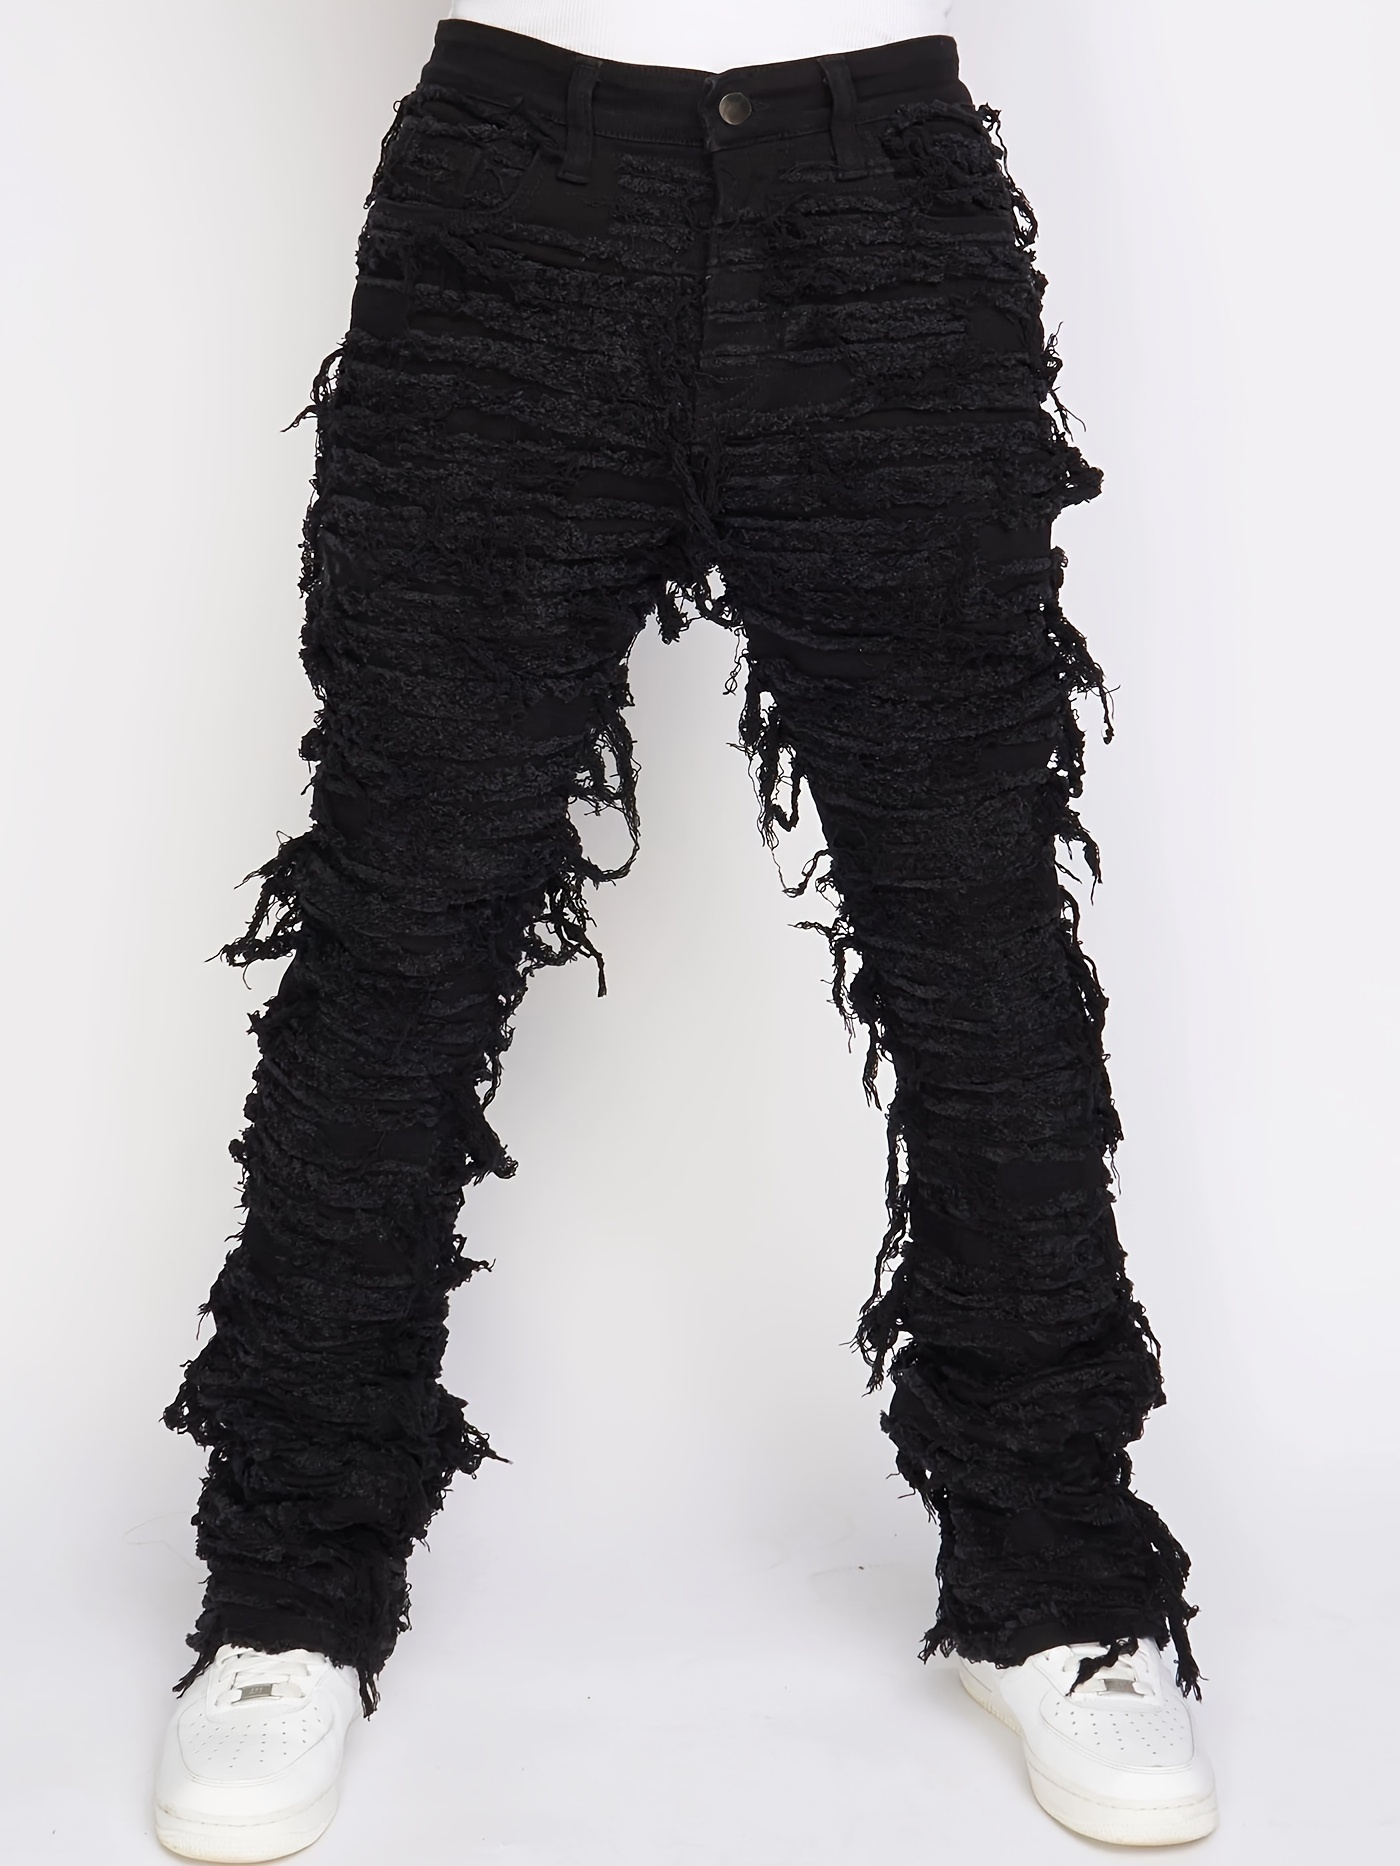 Mens Denim Trousers Black Ripped Jeans Paint Splatter Stretch Frayed  Straight